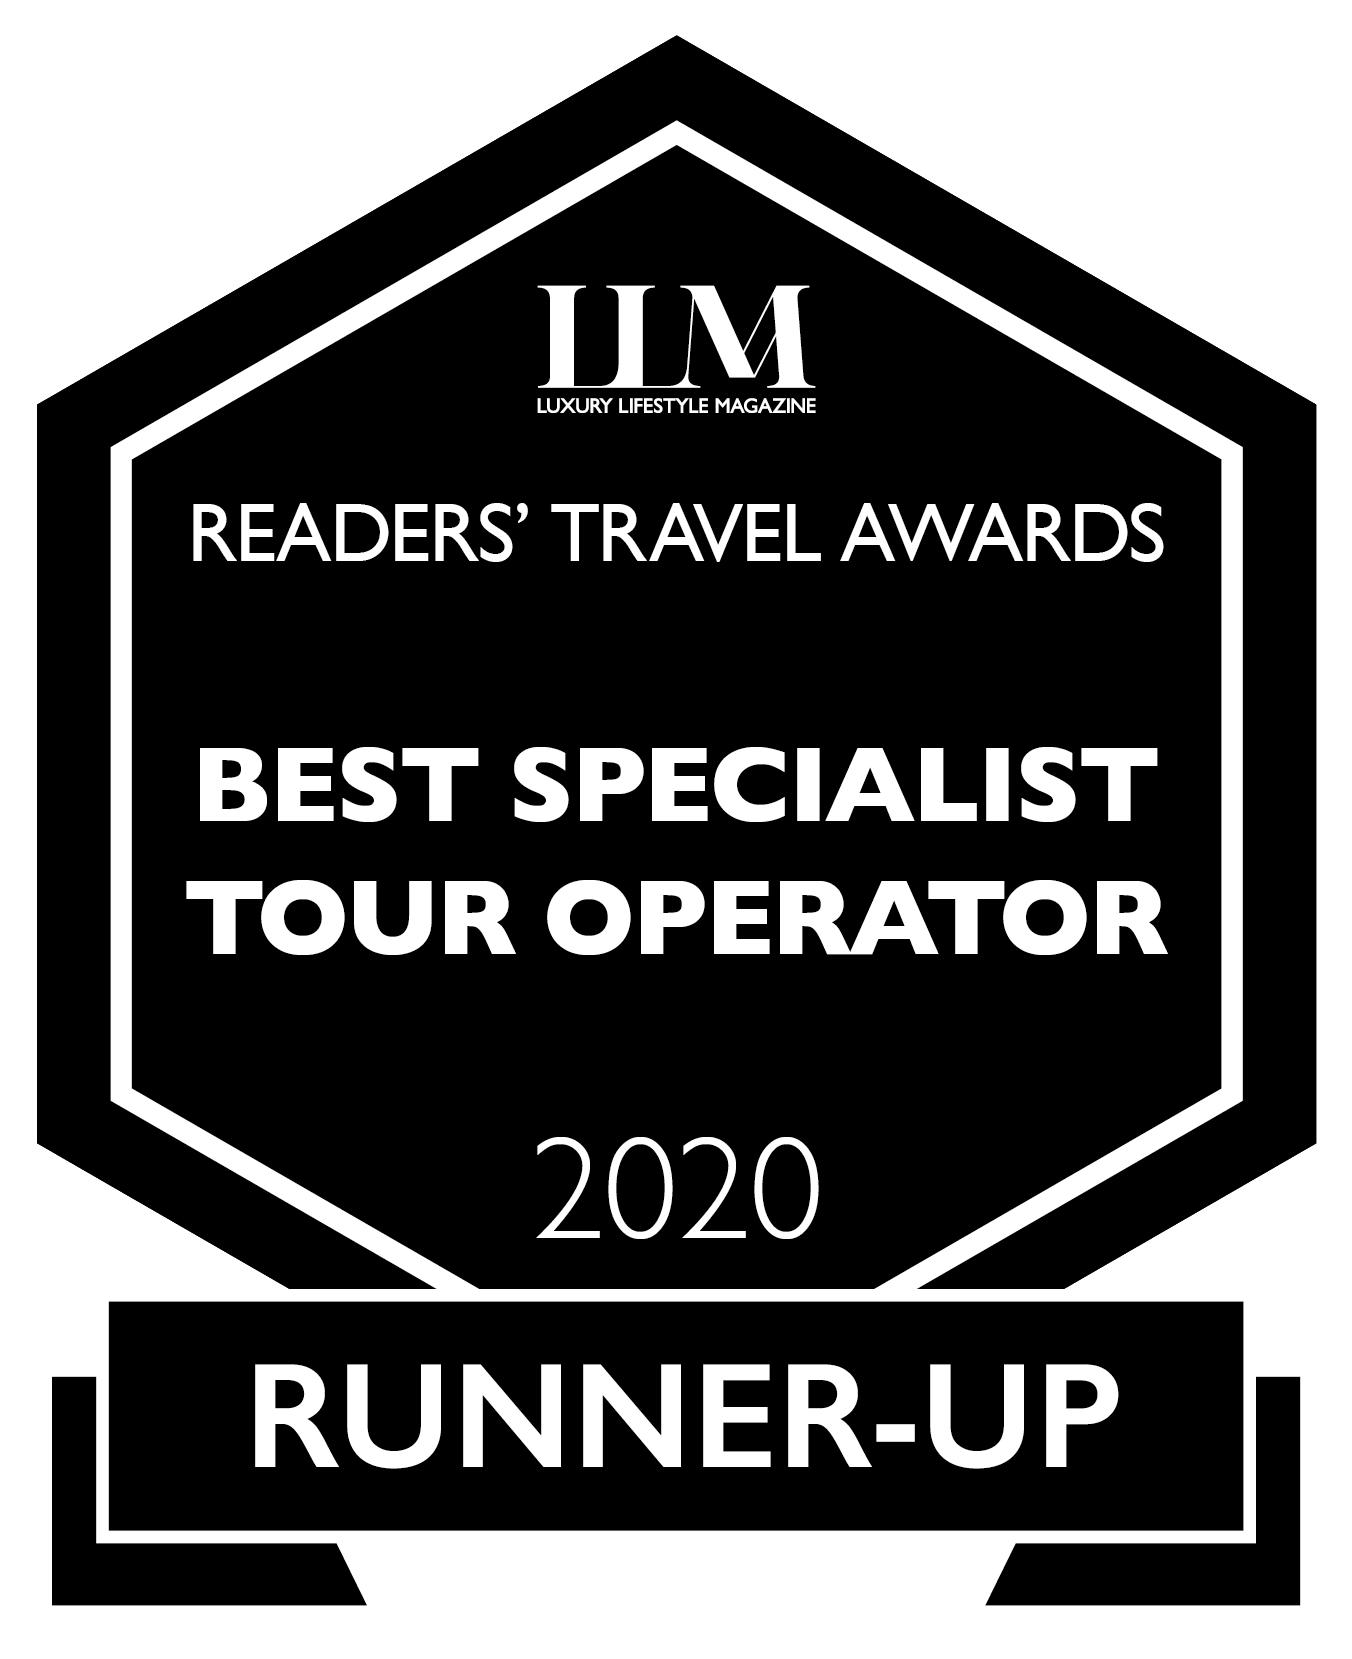 LLM Travel Readers Awards Best Specialist Tour Operator